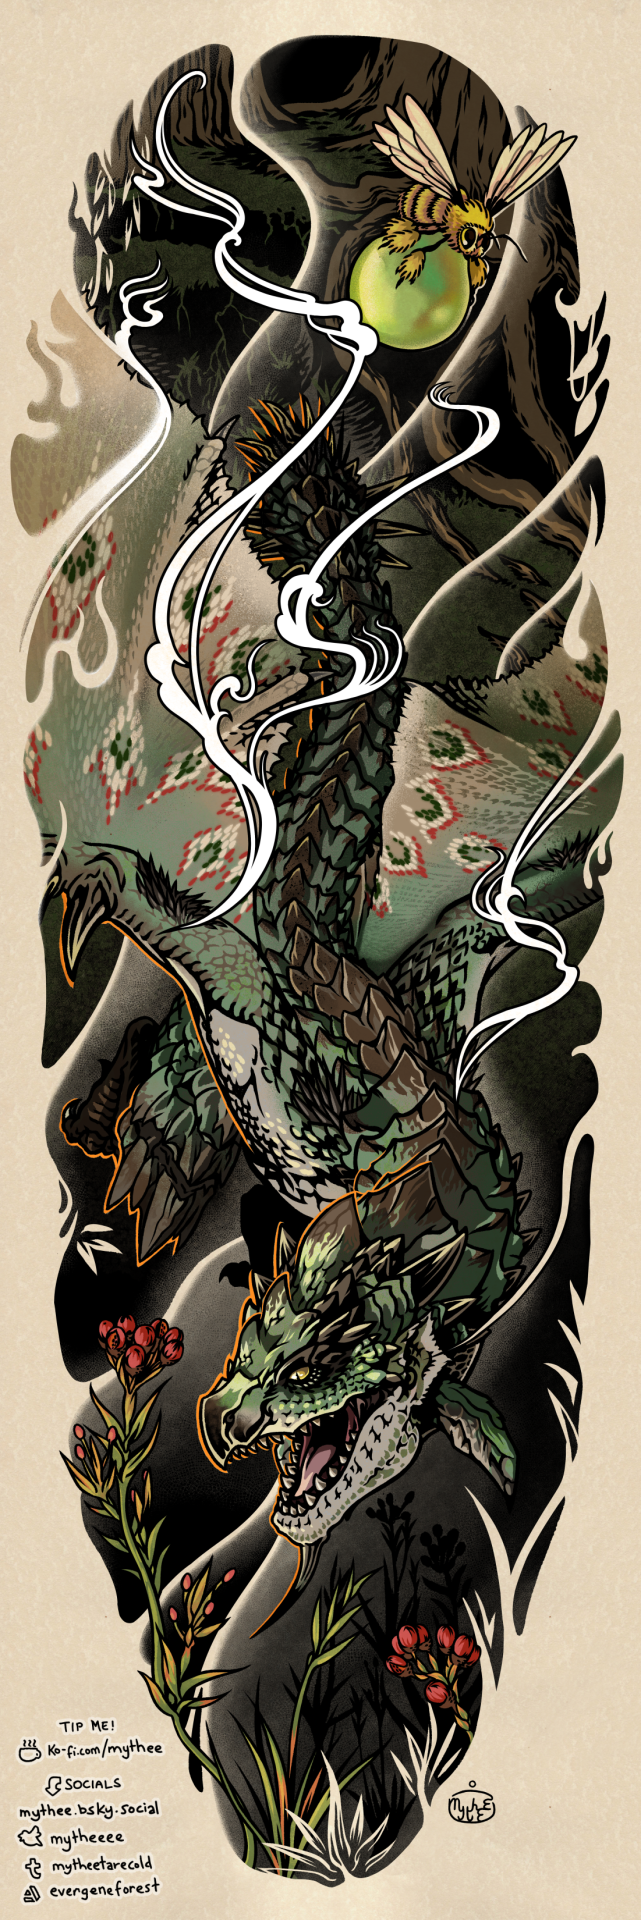 Rathian rushed her foes, her next meal in mind;
Caught in her toes, a hunter fell behind.
Hoisting its heals, a vigorwasp hovered by
So the hunter absconded, now all slick and spry!

I had a rush commish for a Rathalos tattoo, but turned it into this afterward for print.